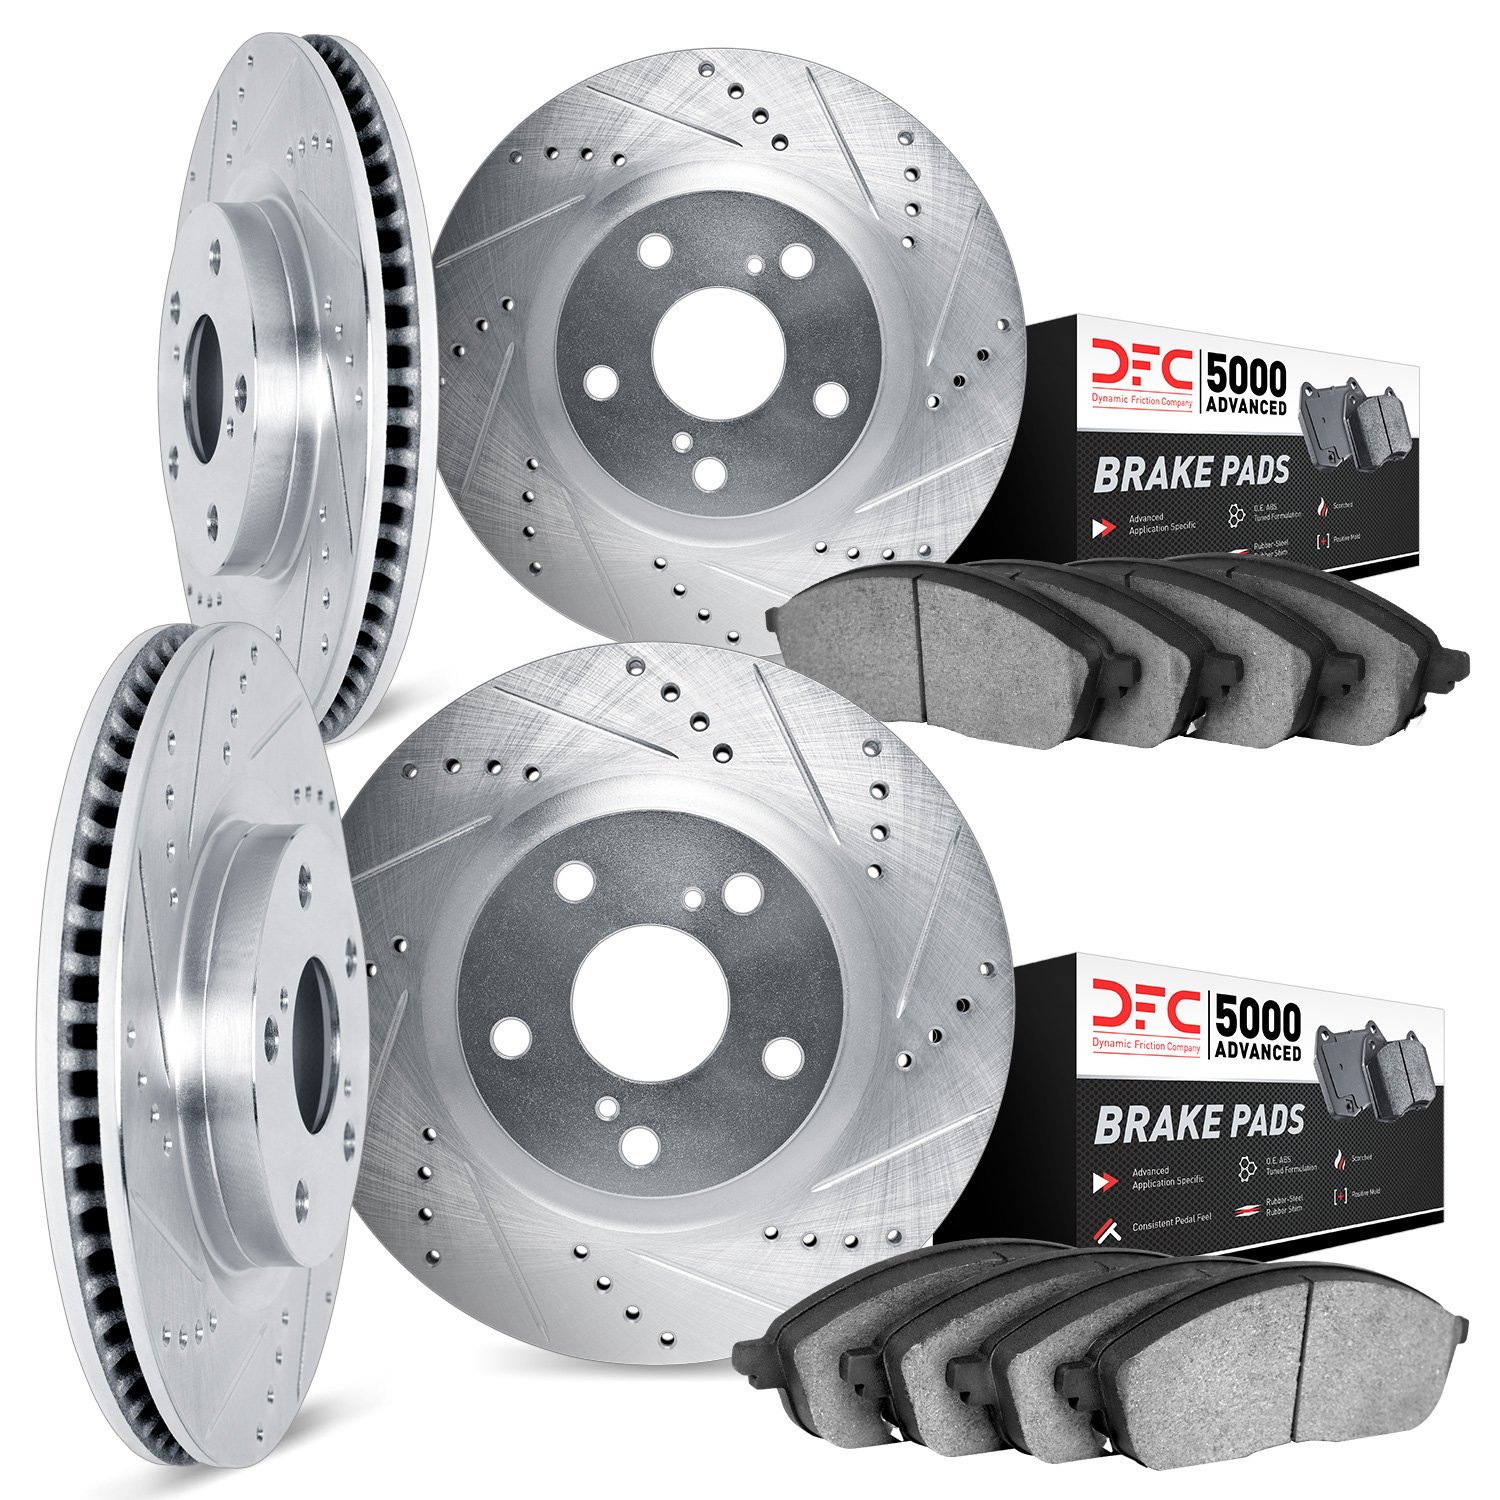 7504-67102 Drilled/Slotted Brake Rotors w/5000 Advanced Brake Pads Kit [Silver], 2006-2020 Infiniti/Nissan, Position: Front and